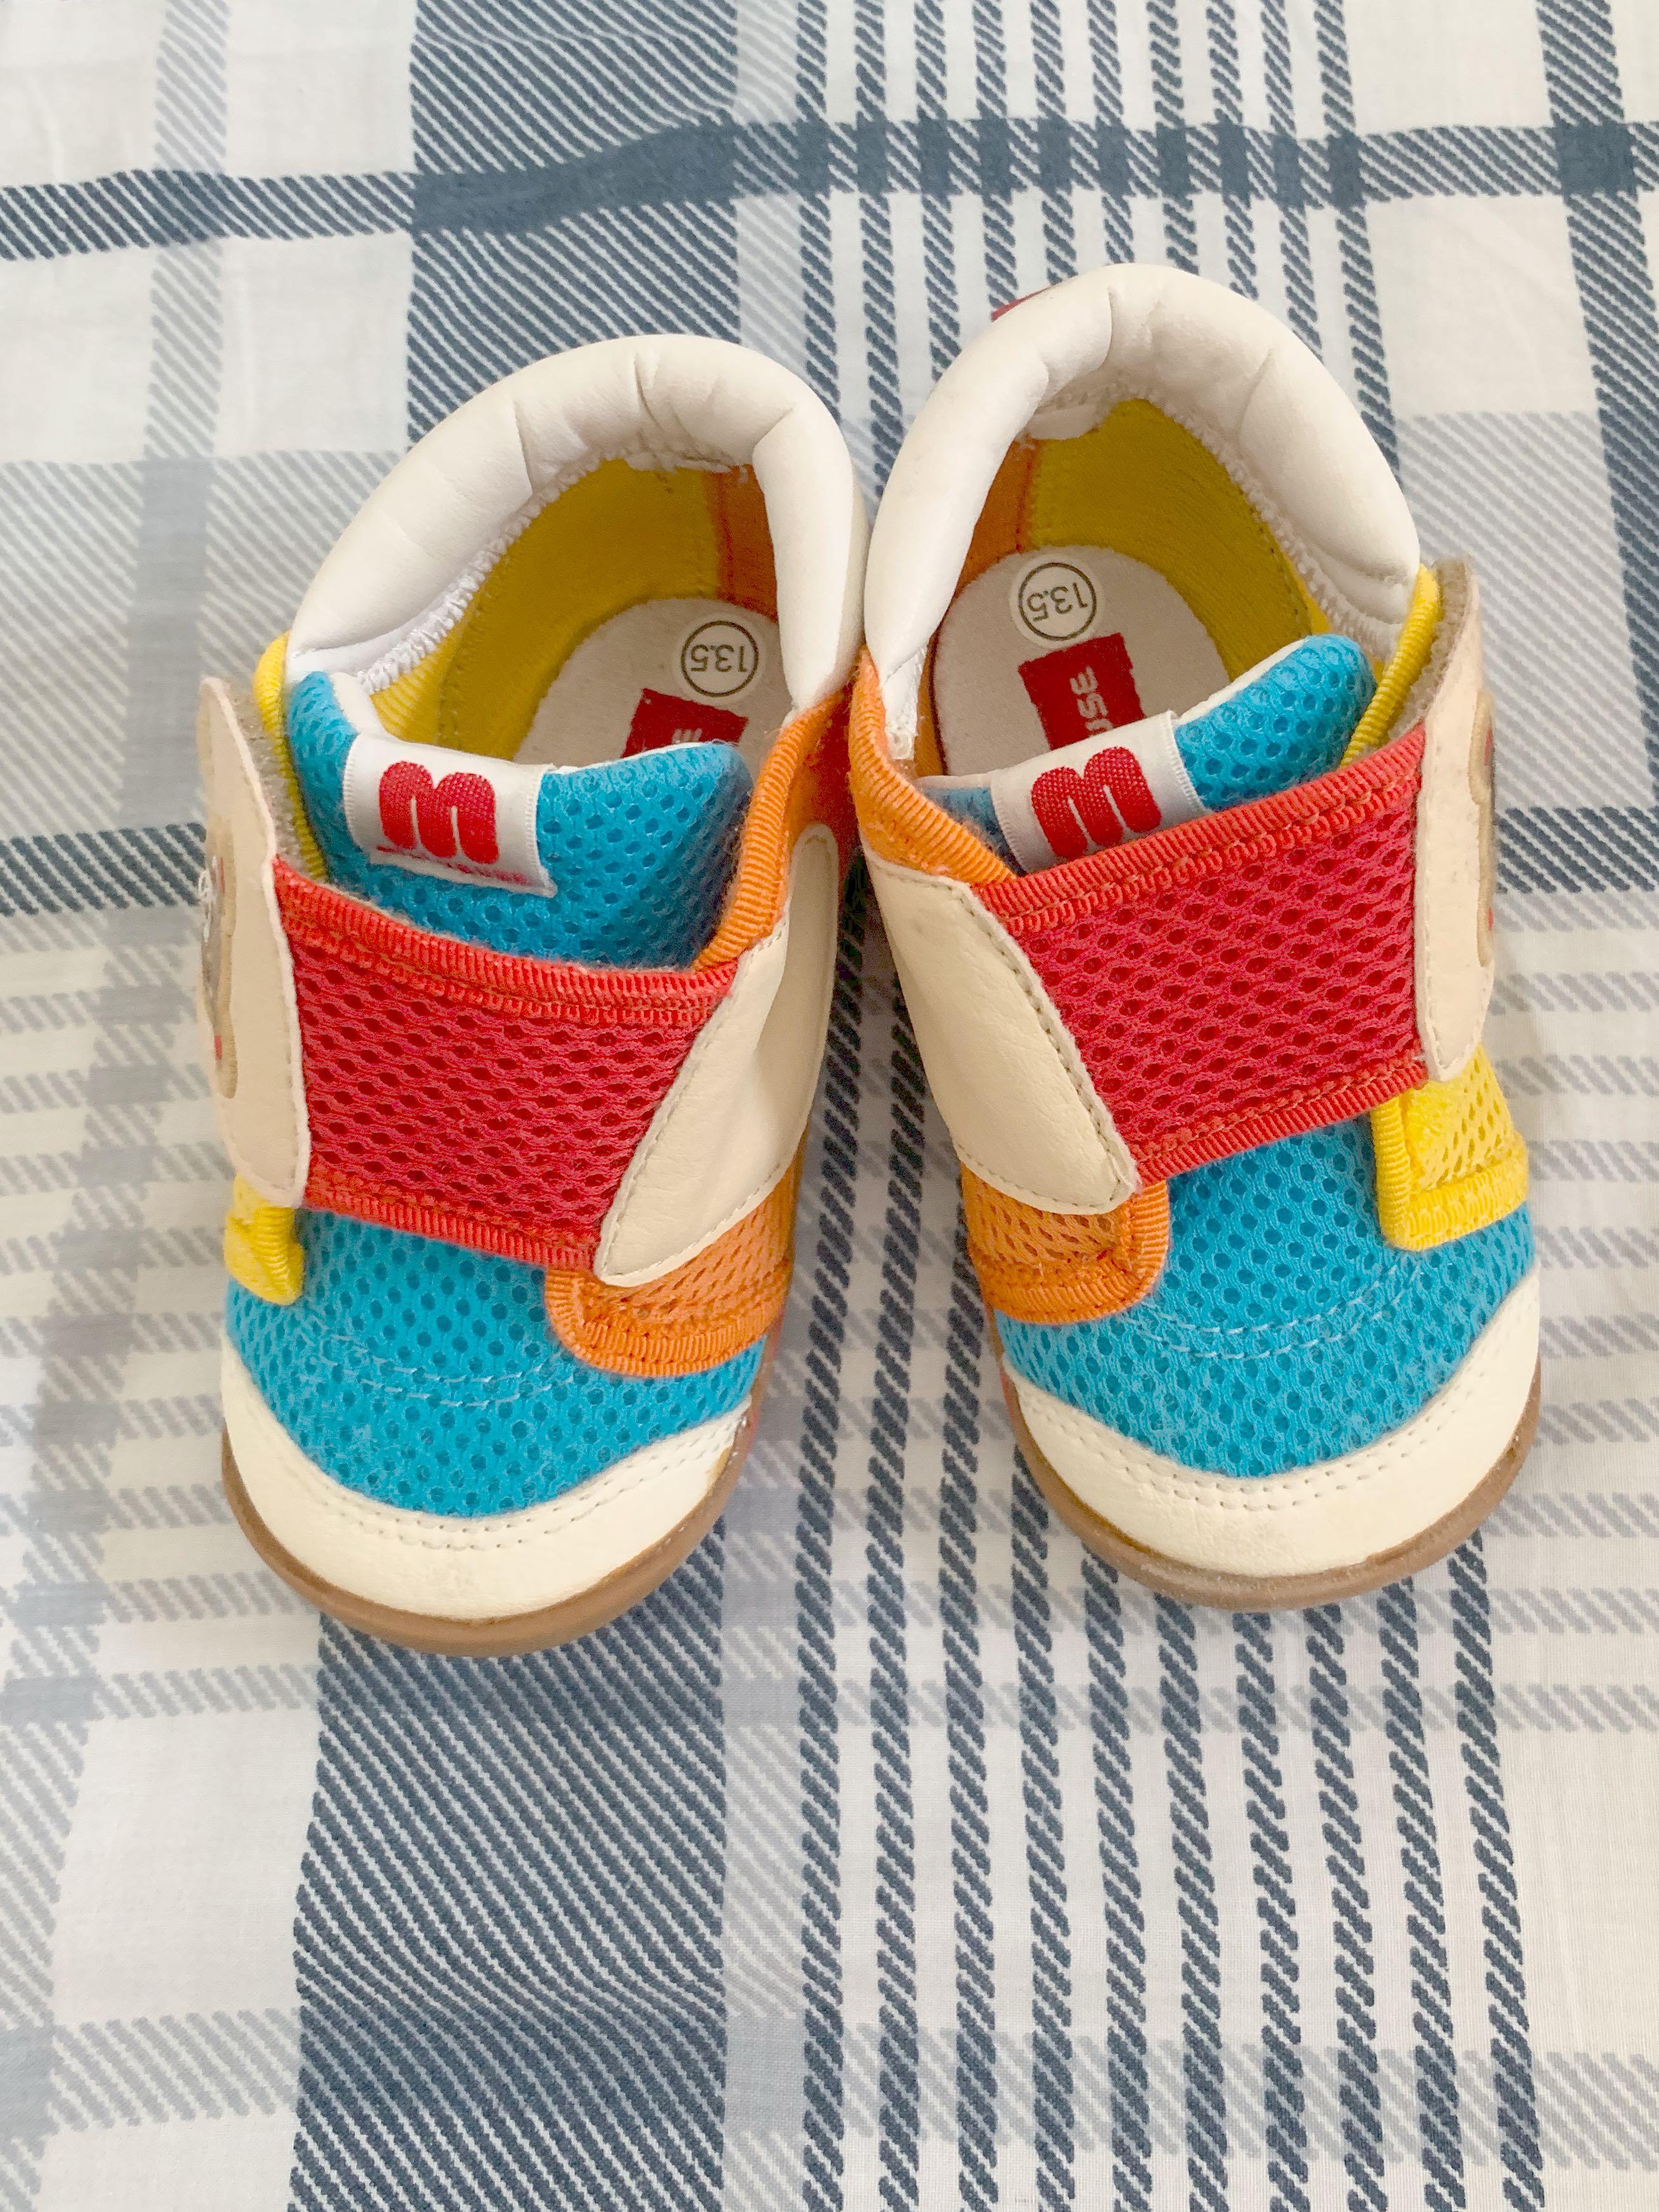 13.5 cm baby shoes